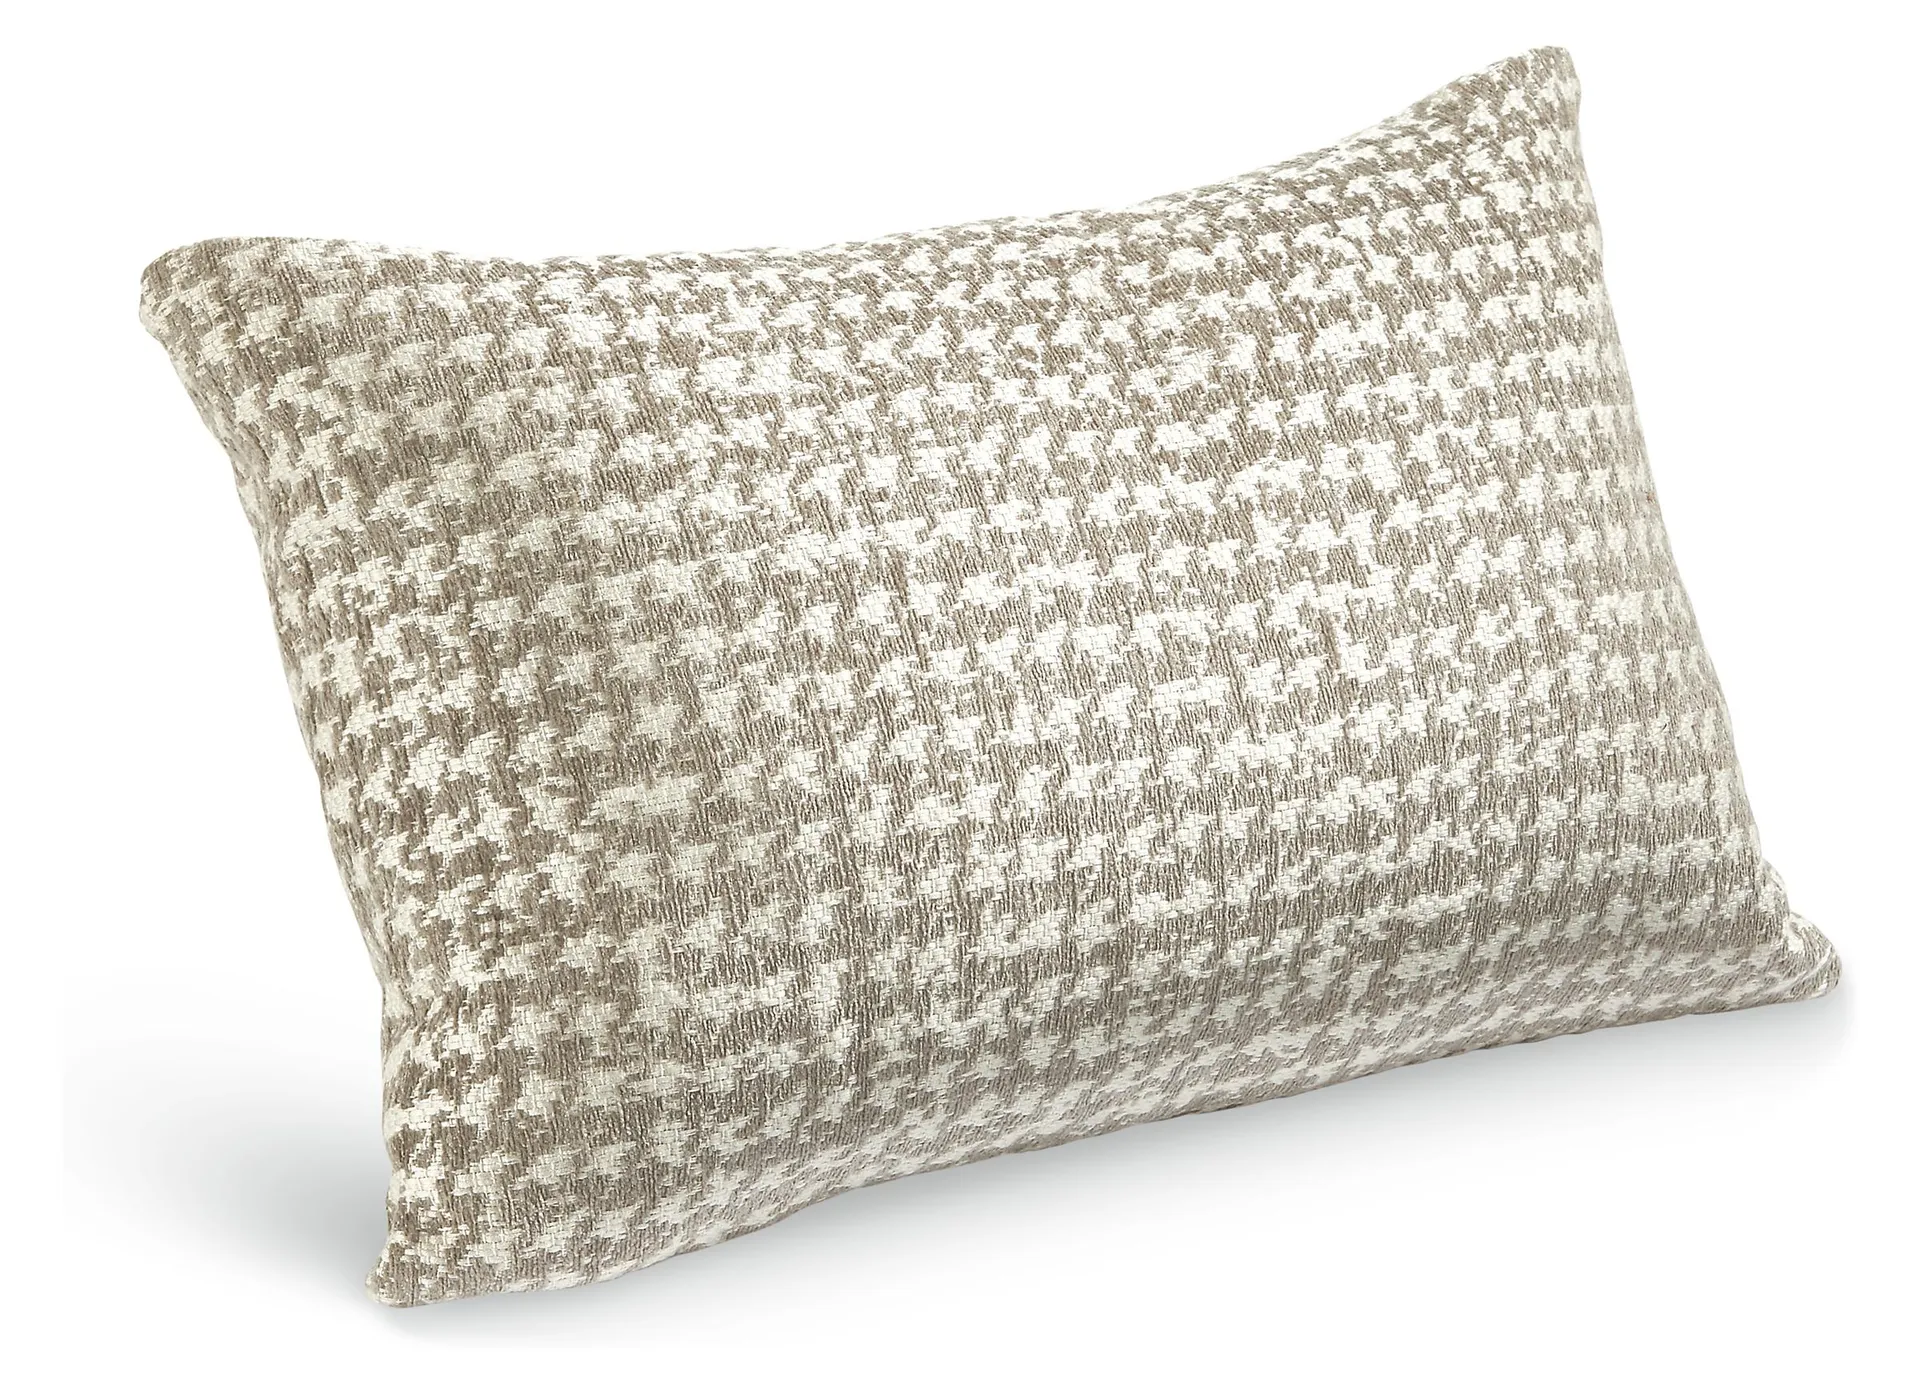 Barnes 20w 13h Throw Pillow in Grey/White with Down Alternative Insert